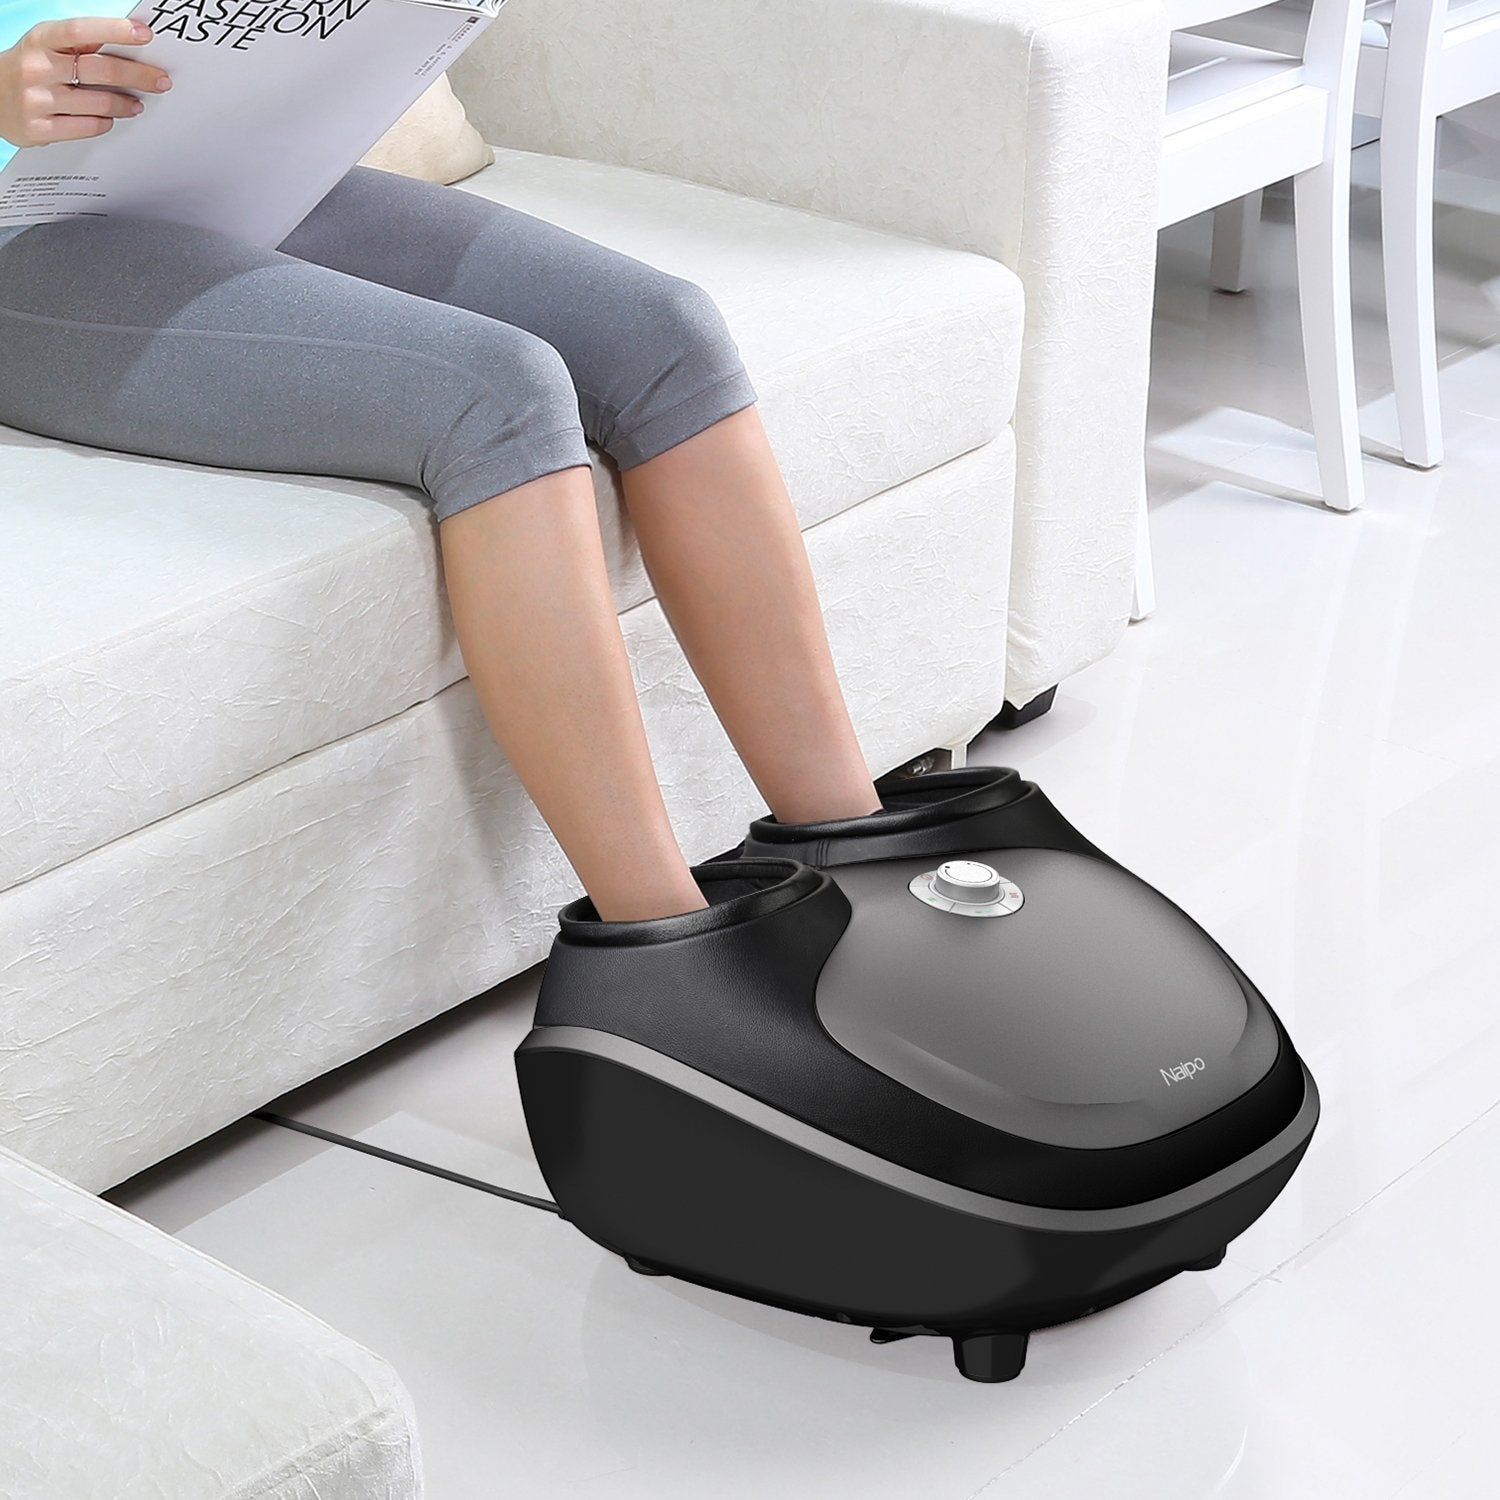 Naipo Foot and Calf Massager Foldable Machine Shiatsu Rolling Tapping and  Air Compression Feet Massage with